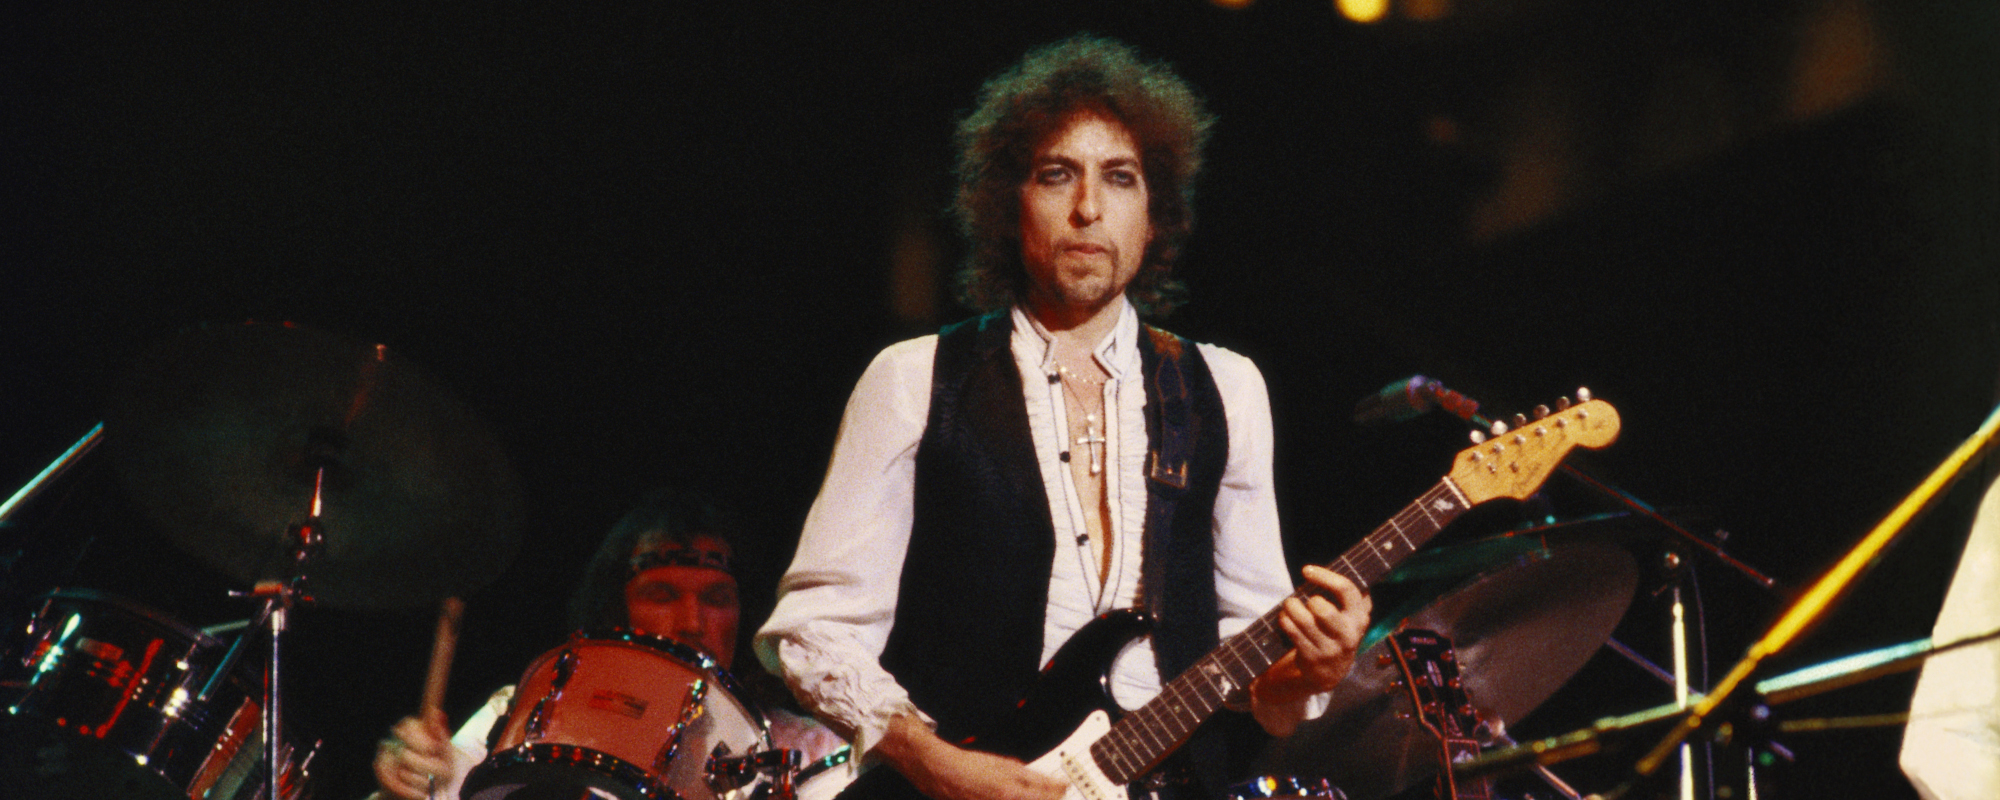 Behind the Album: Bob Dylan Finds His Religion on ‘Slow Train Coming’ [Video]